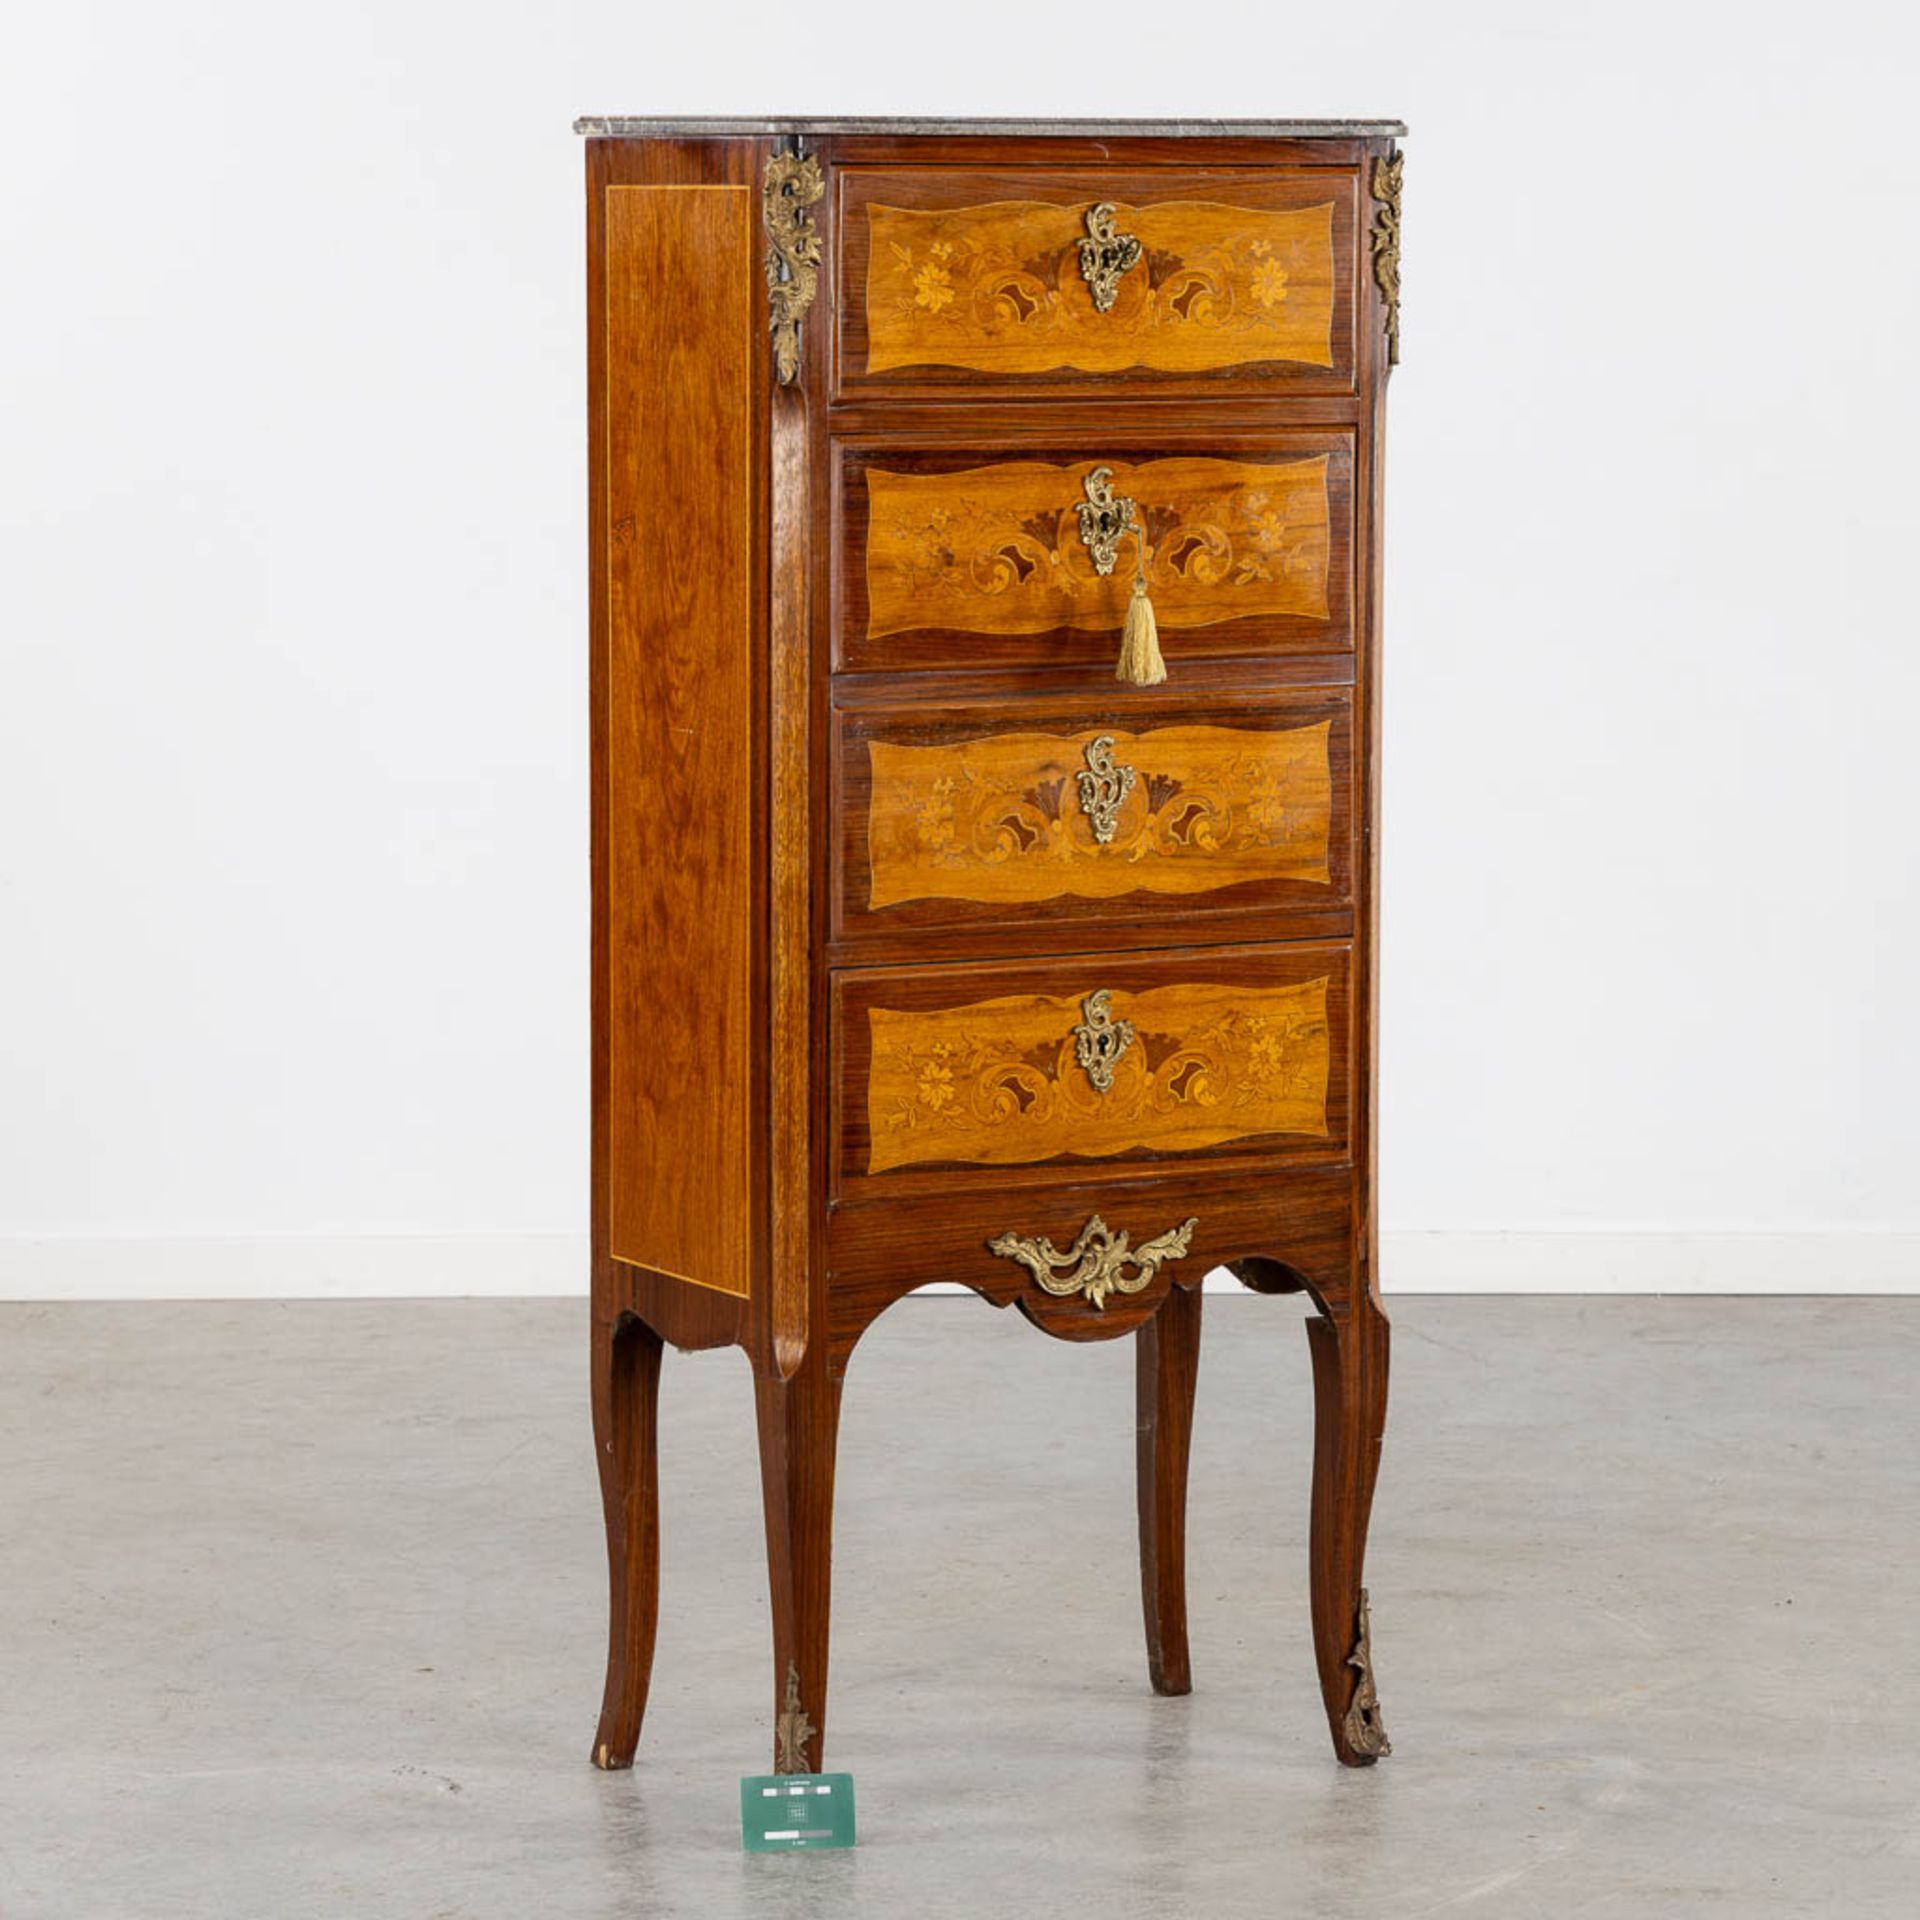 A Secretaire cabinet, Marquetry inlay and mounted with bronze. Circa 1900. (L:34 x W:56 x H:128 cm) - Bild 2 aus 15